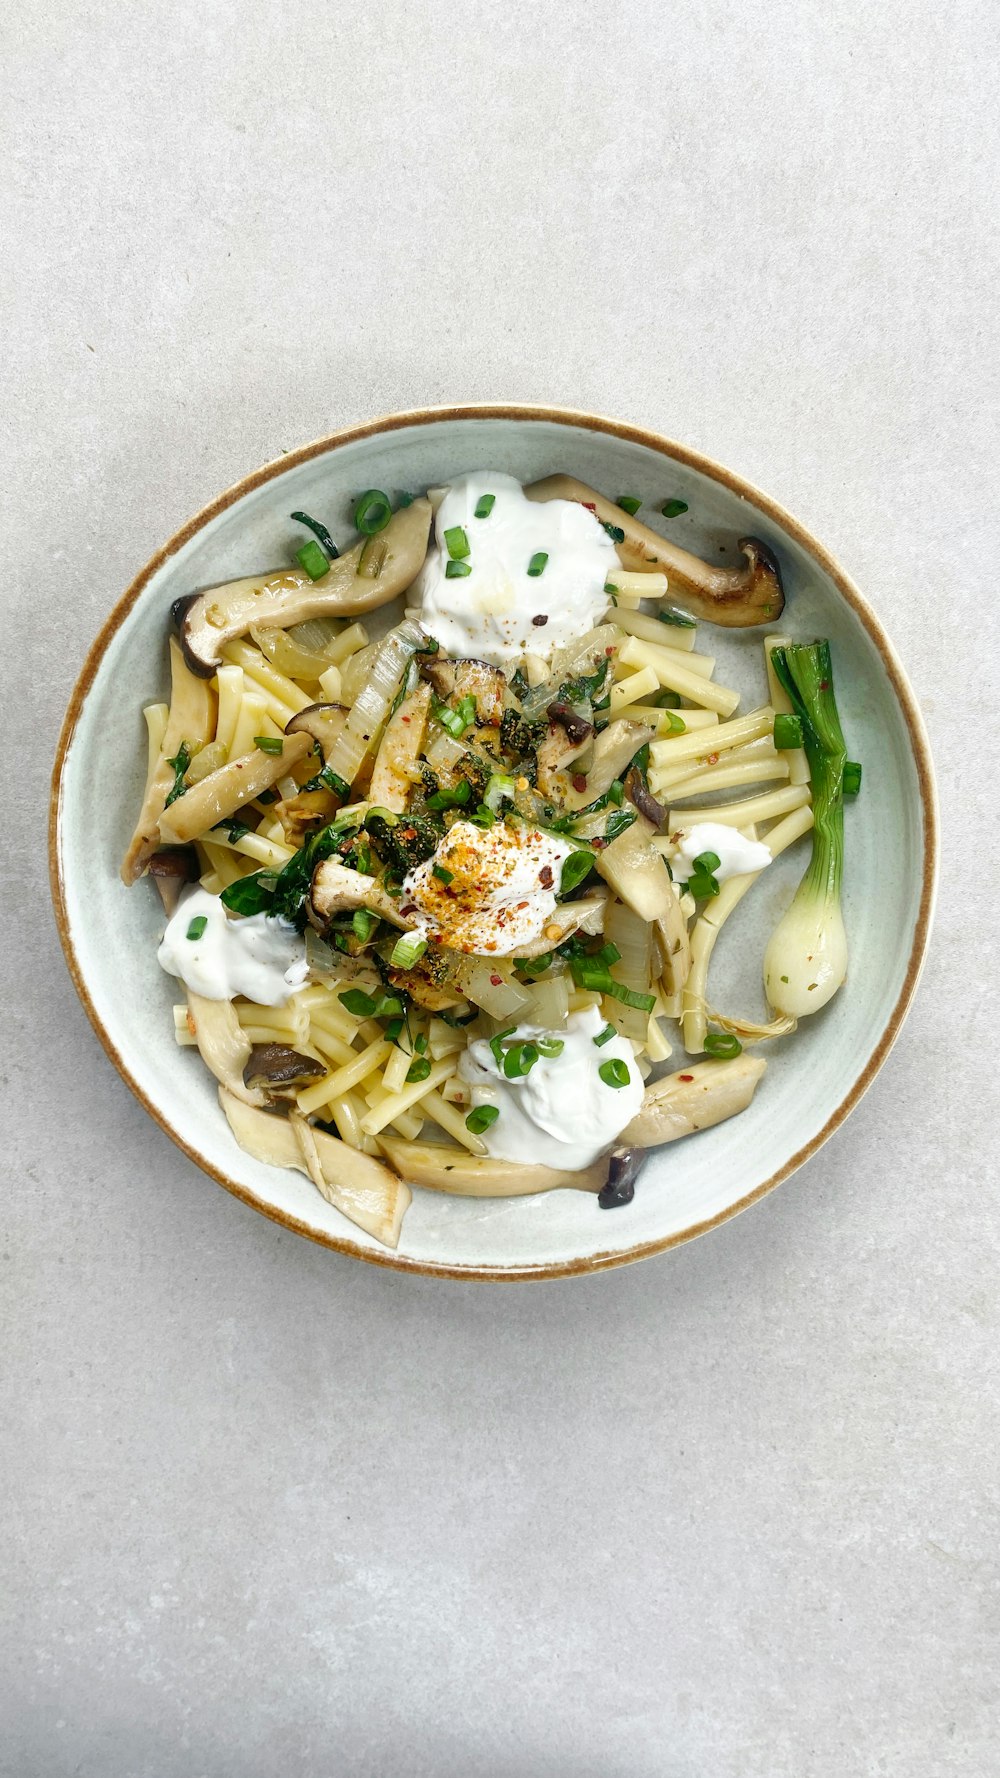 a plate of pasta with mushrooms, asparagus and sour cream